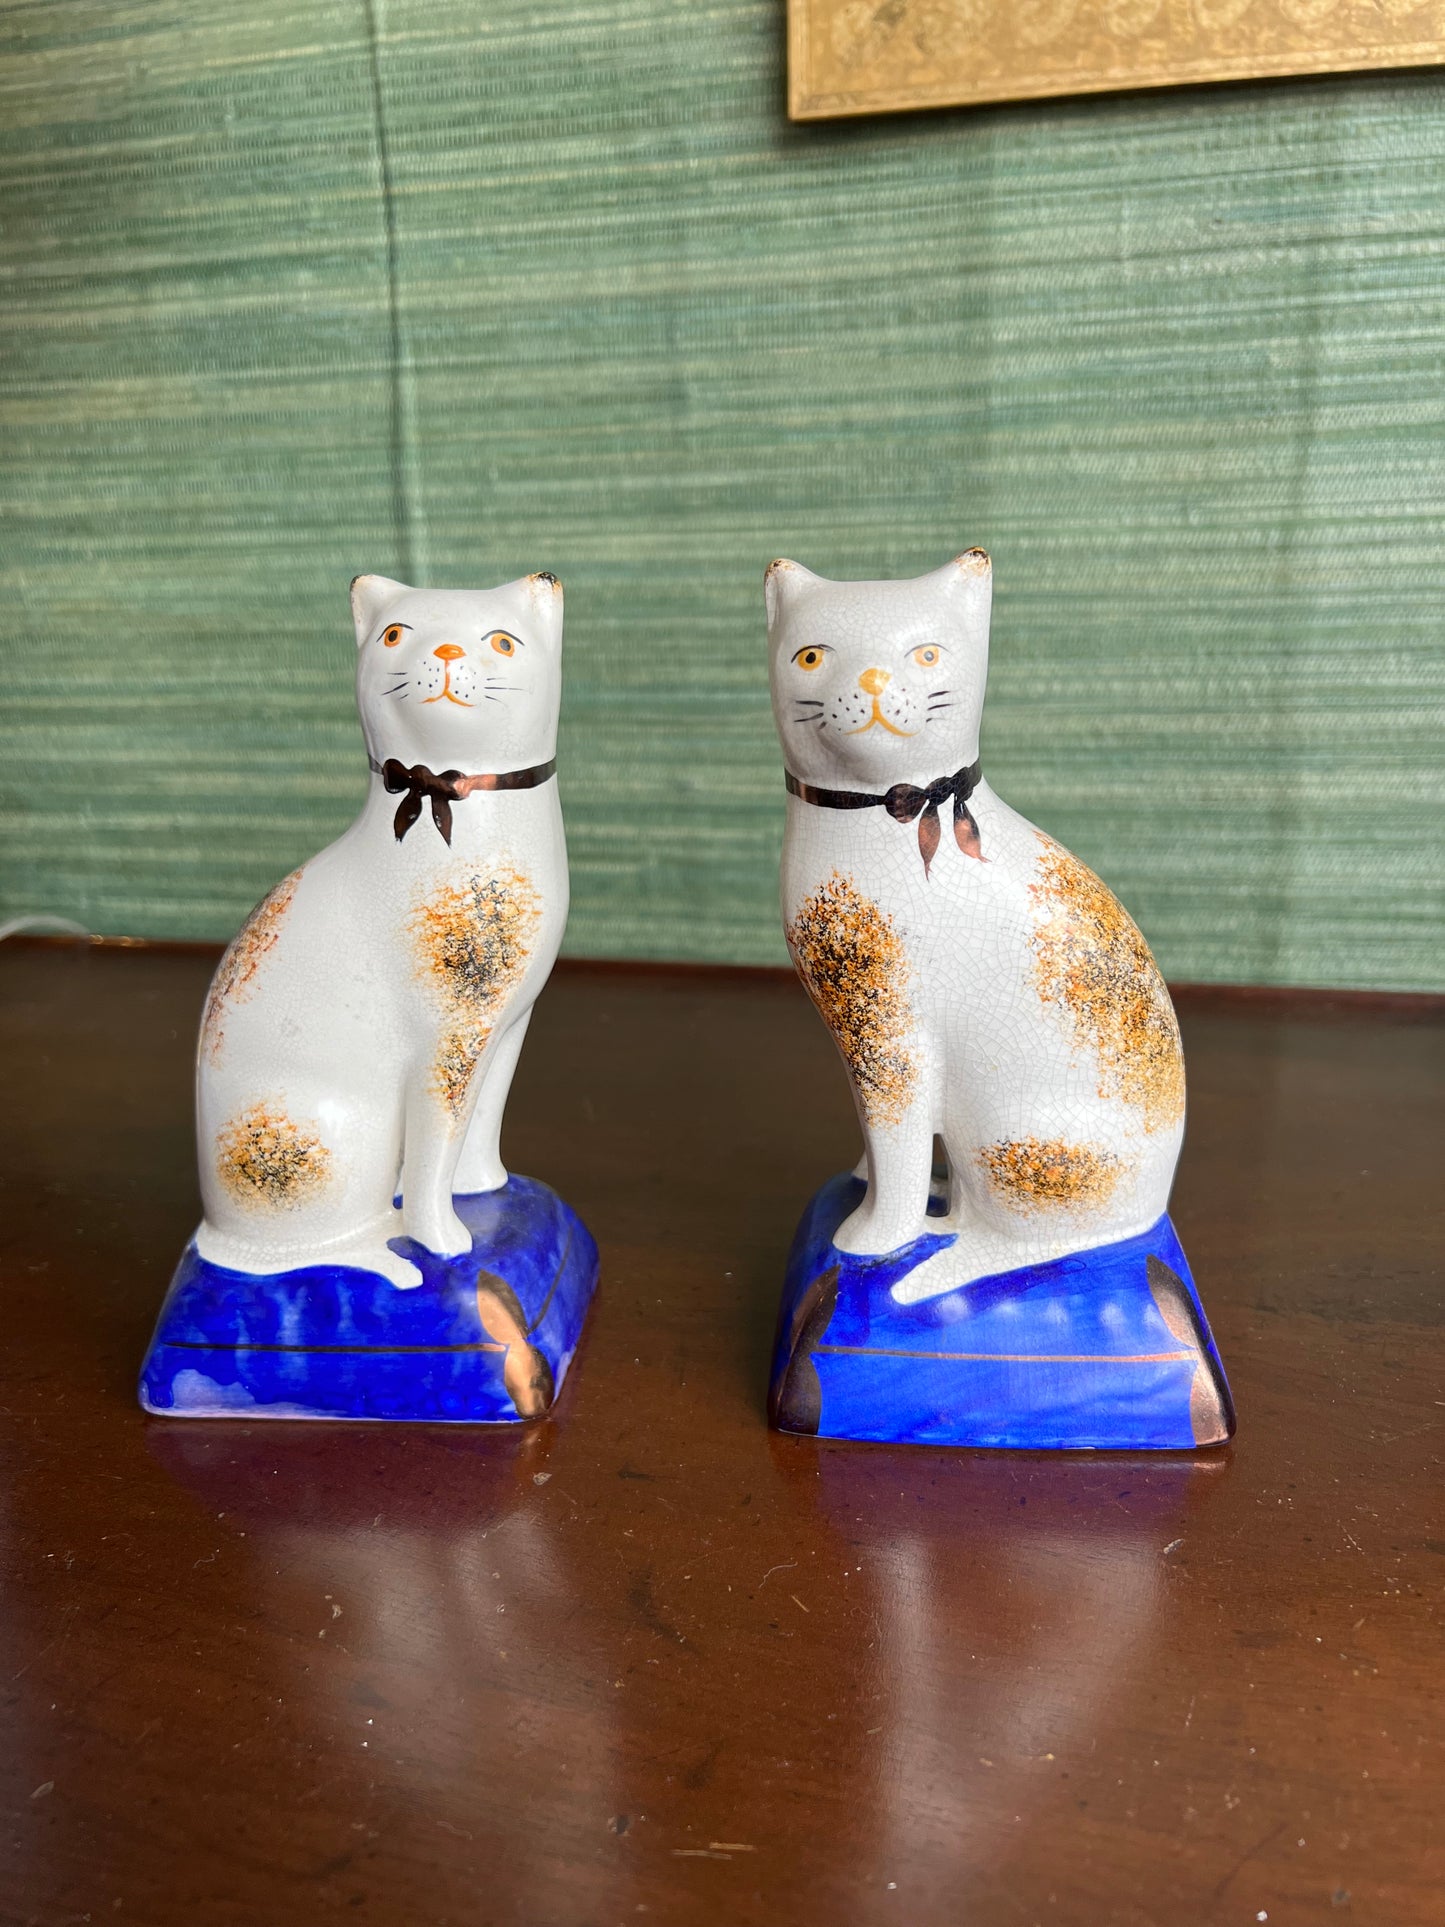 Pair of Staffordshire Cats